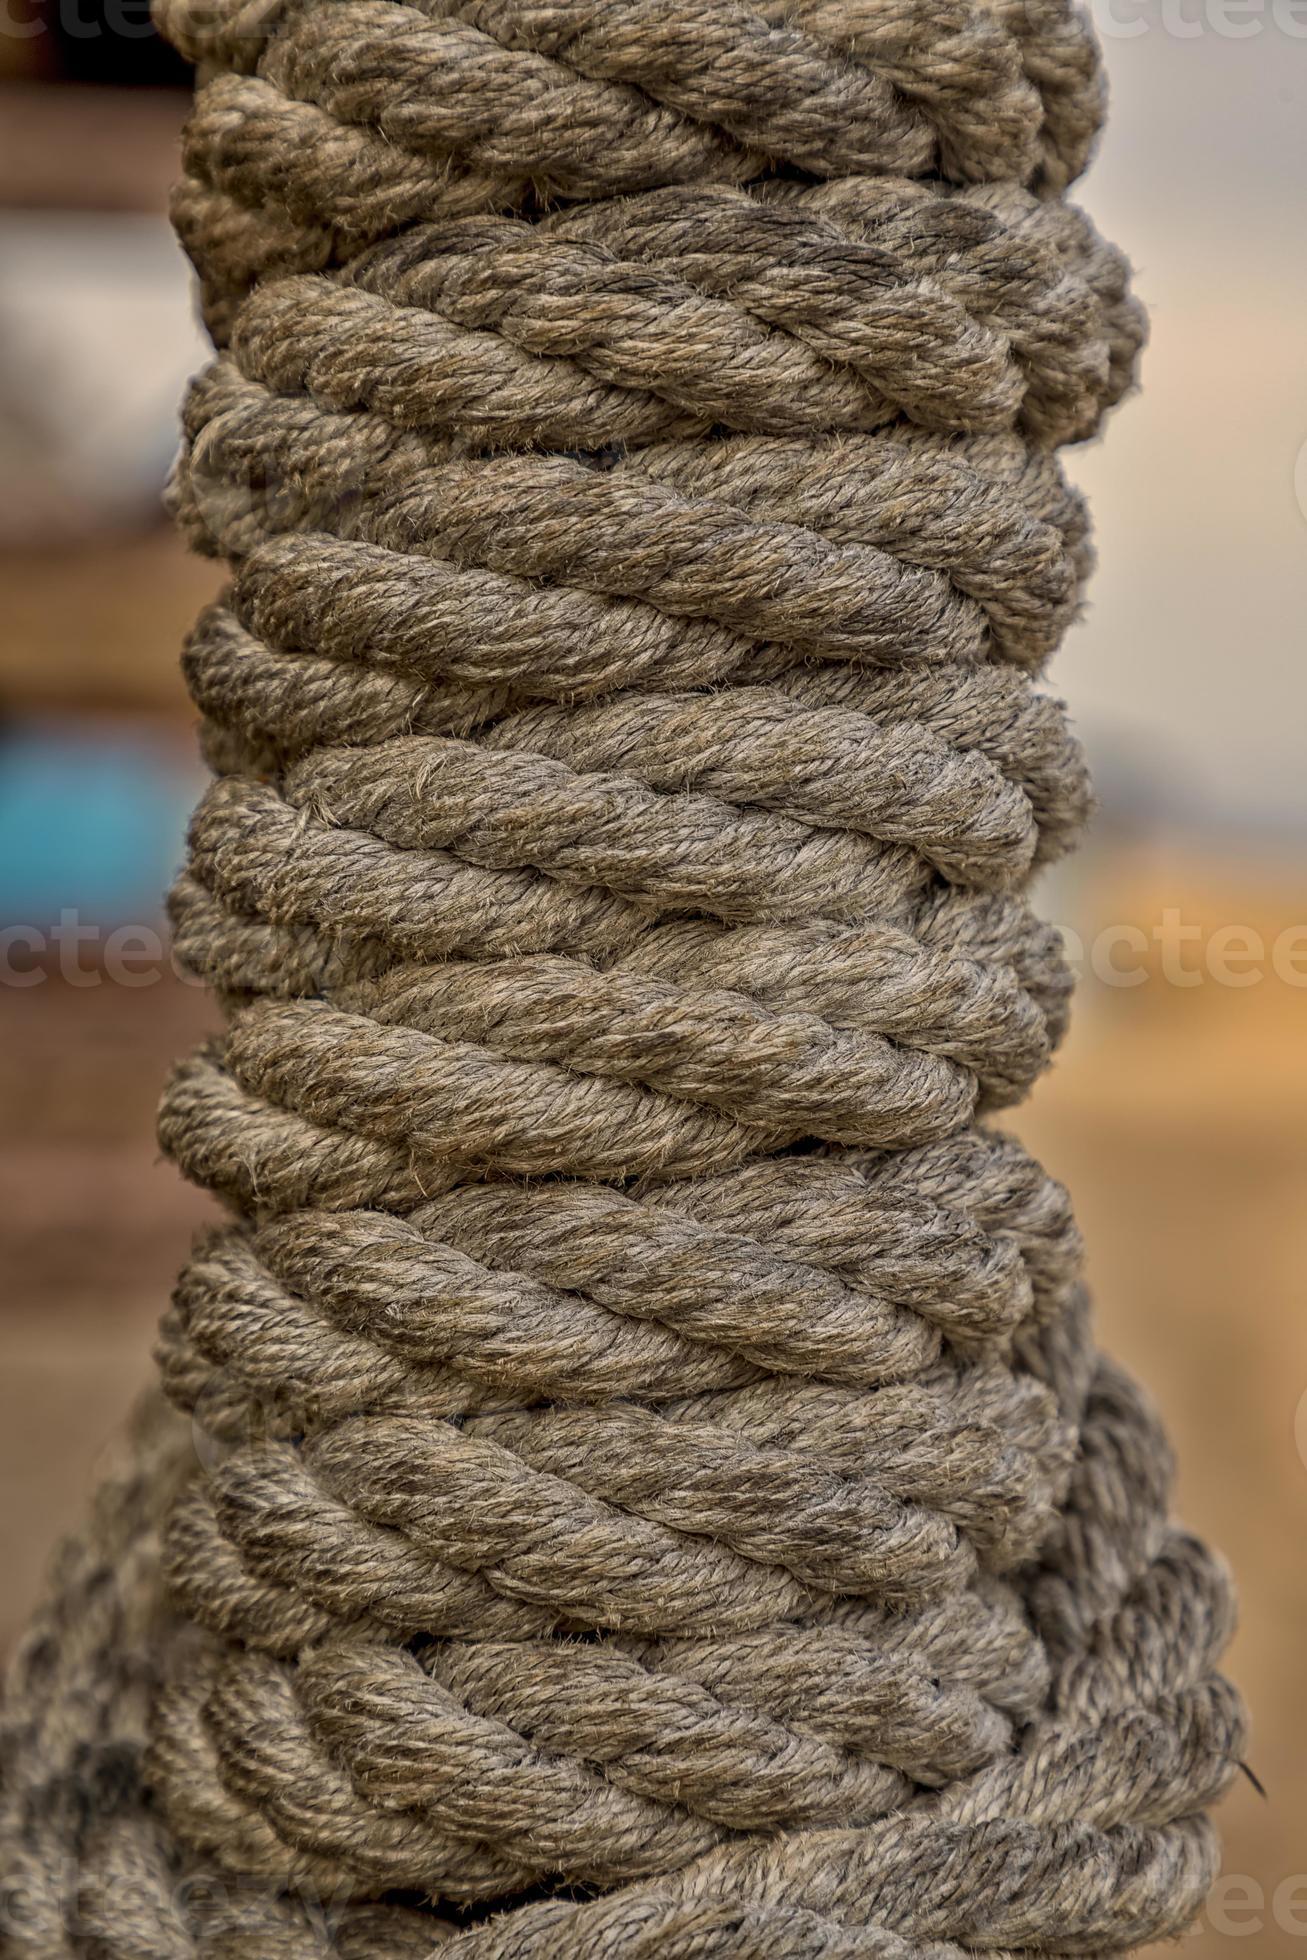 https://static.vecteezy.com/system/resources/previews/017/024/085/large_2x/reeled-rope-on-the-coil-the-texture-of-a-rope-thick-brown-rope-rolled-into-a-roll-vertical-layout-background-texture-photo.jpg